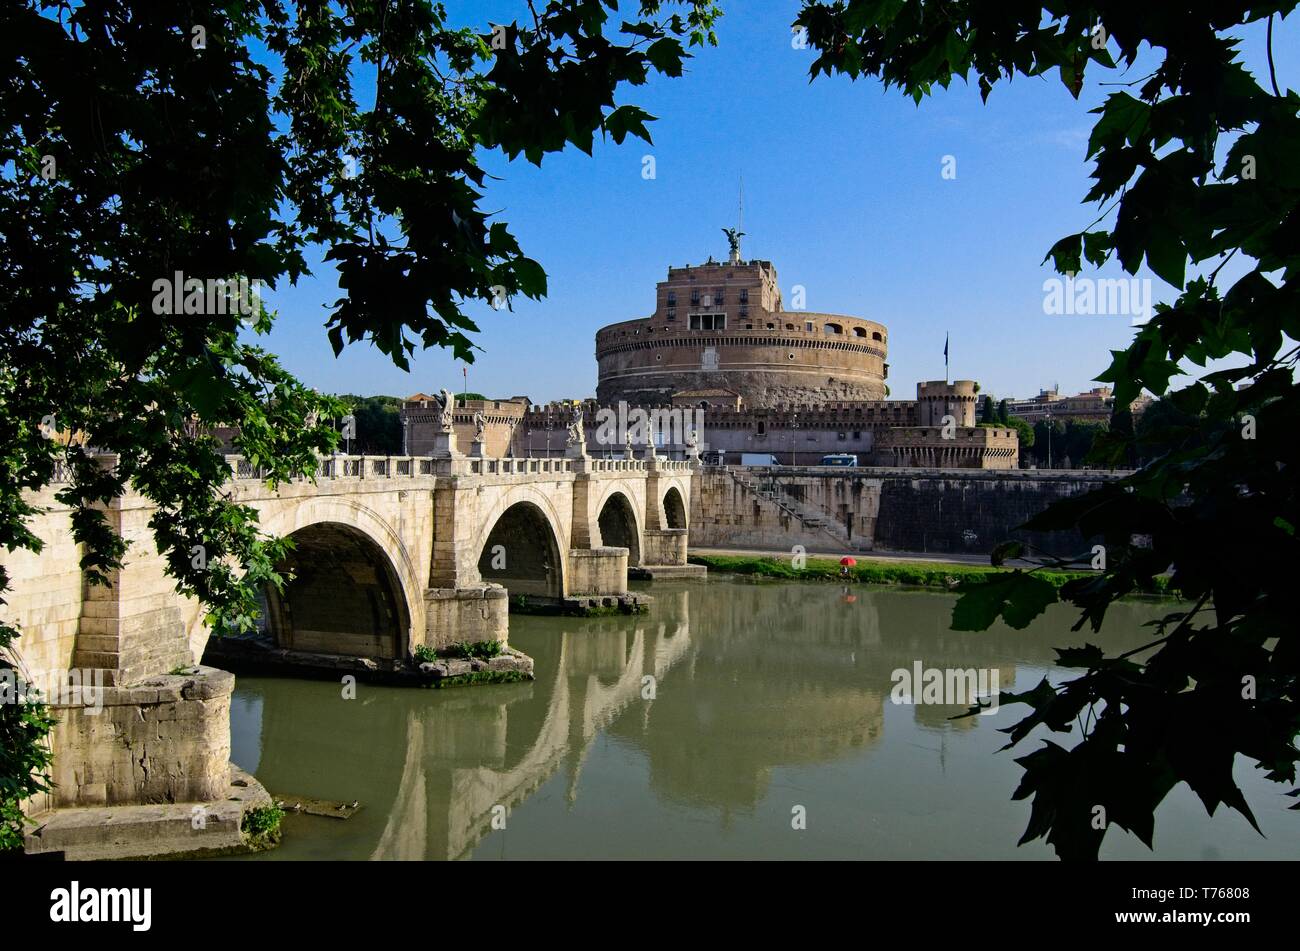 View through trees of Ponte Sant'Angelo and Castel Sant'Angelo across the Tiber in Rome under a clear blue sky, with a reflection in the still water Stock Photo